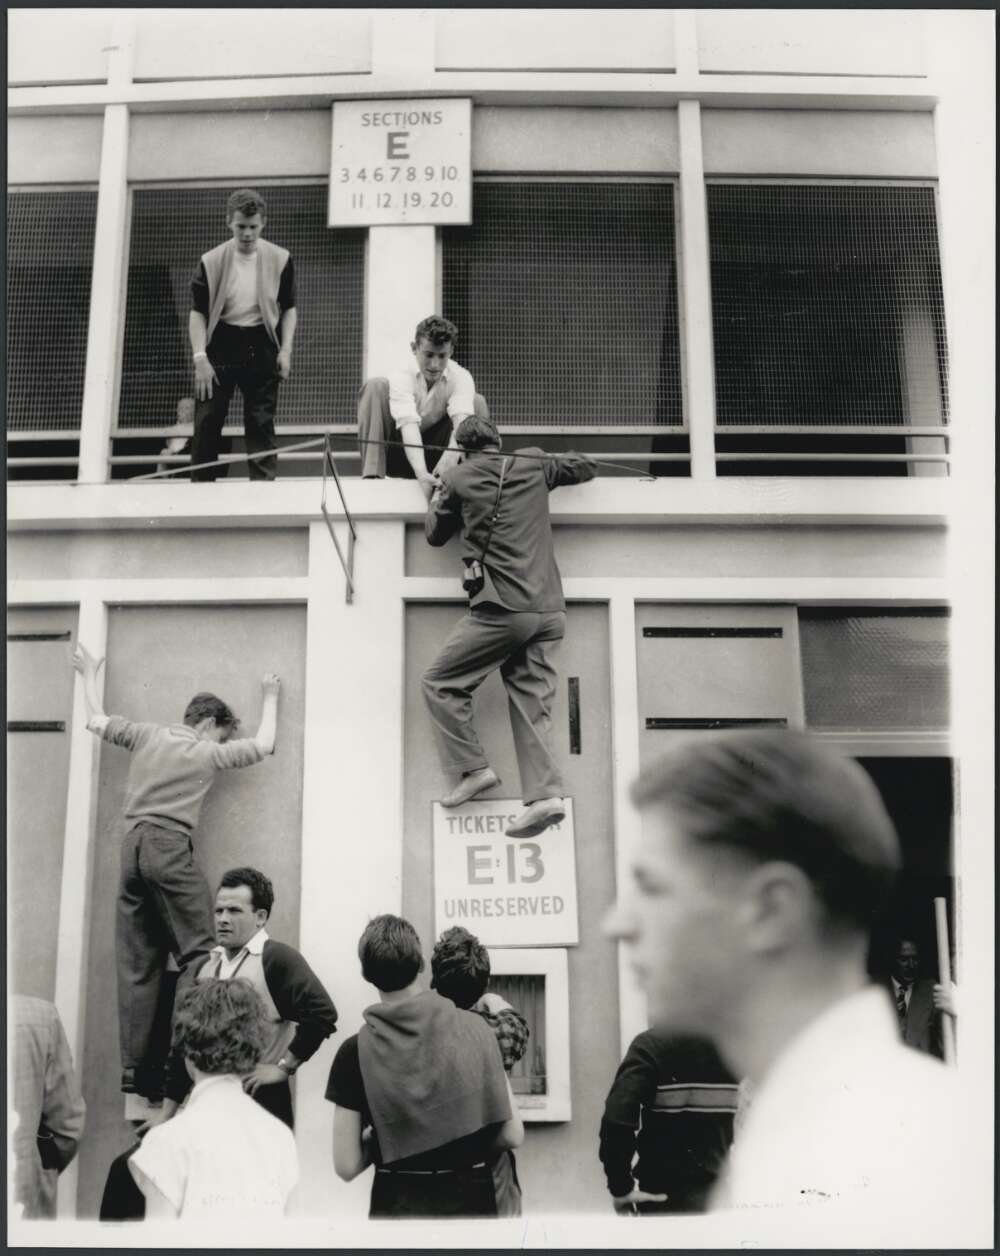 Young men helping eachother climb a wall with signs reading 'Sections E', while other people stand around or walk past